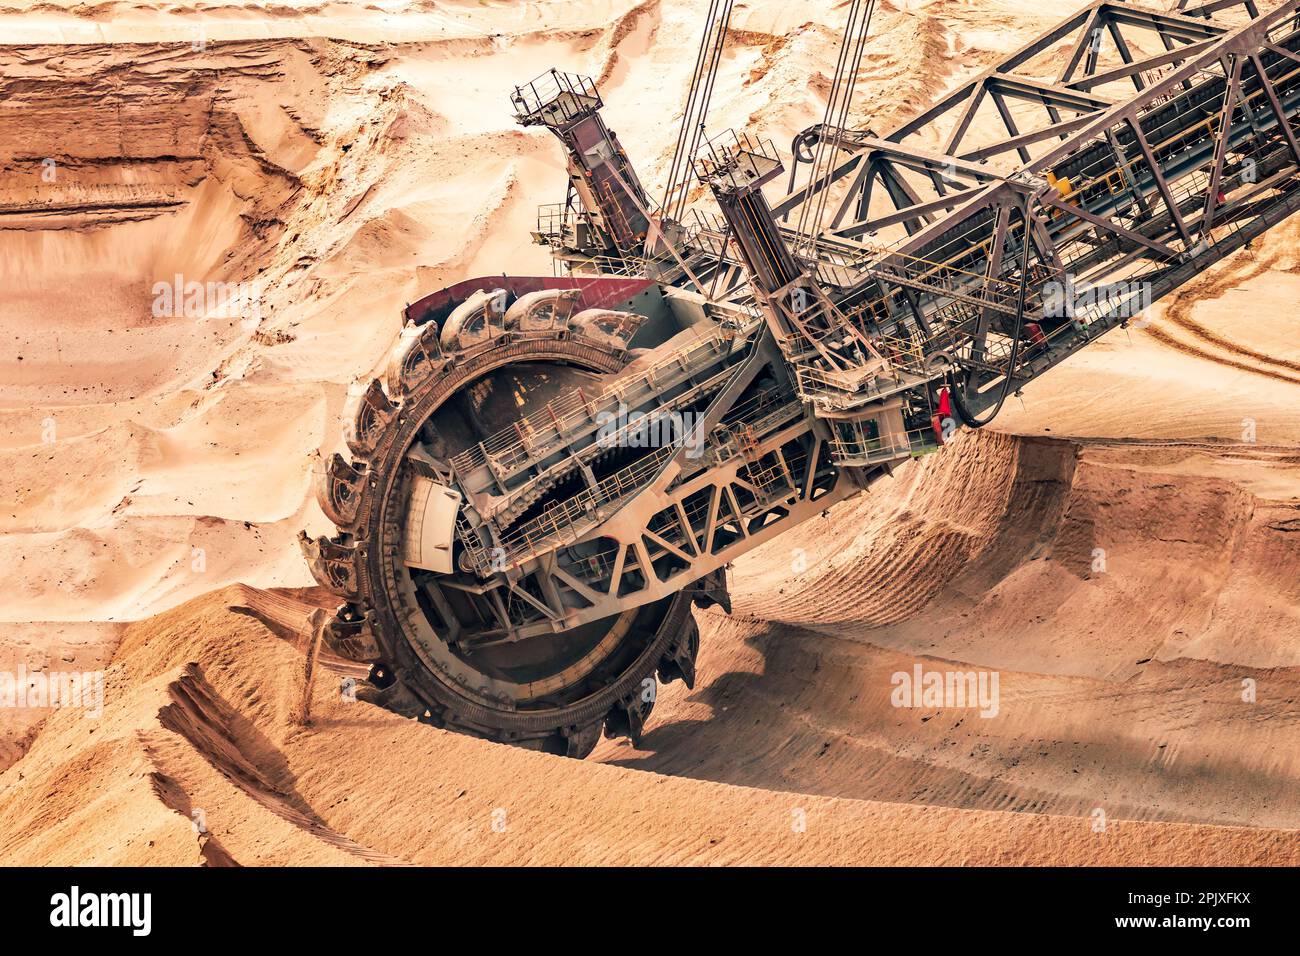 Large bucket wheel excavator mining machine at work in a brown coal open pit mine Stock Photo